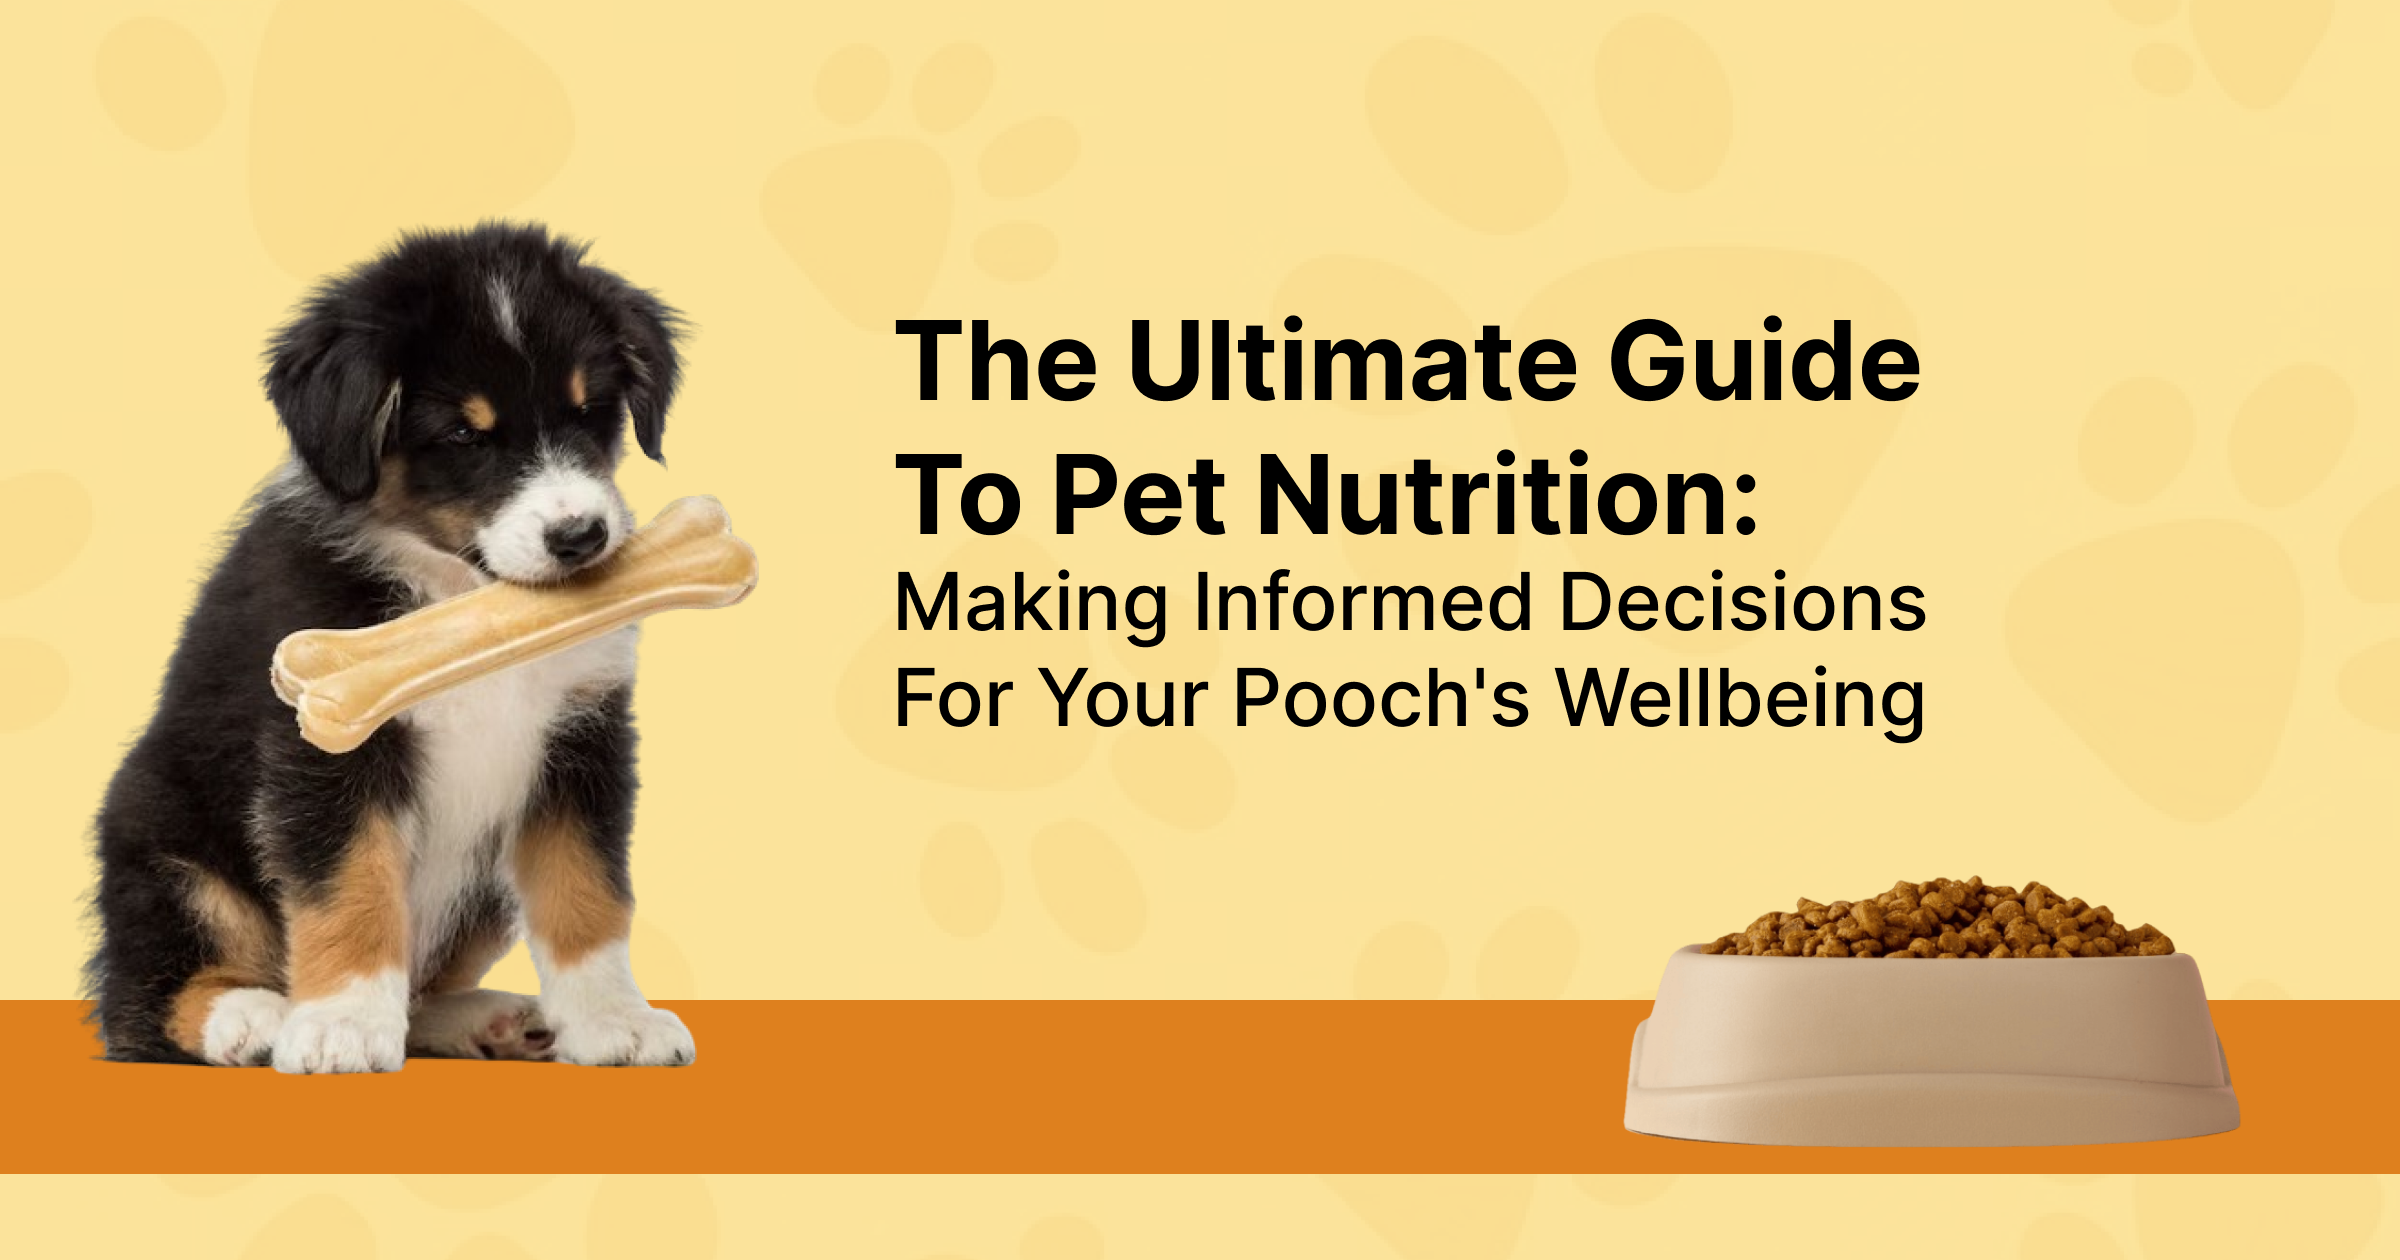 The Ultimate Guide To Pet Nutrition: Making Informed Decisions For Your Pooch's Wellbeing